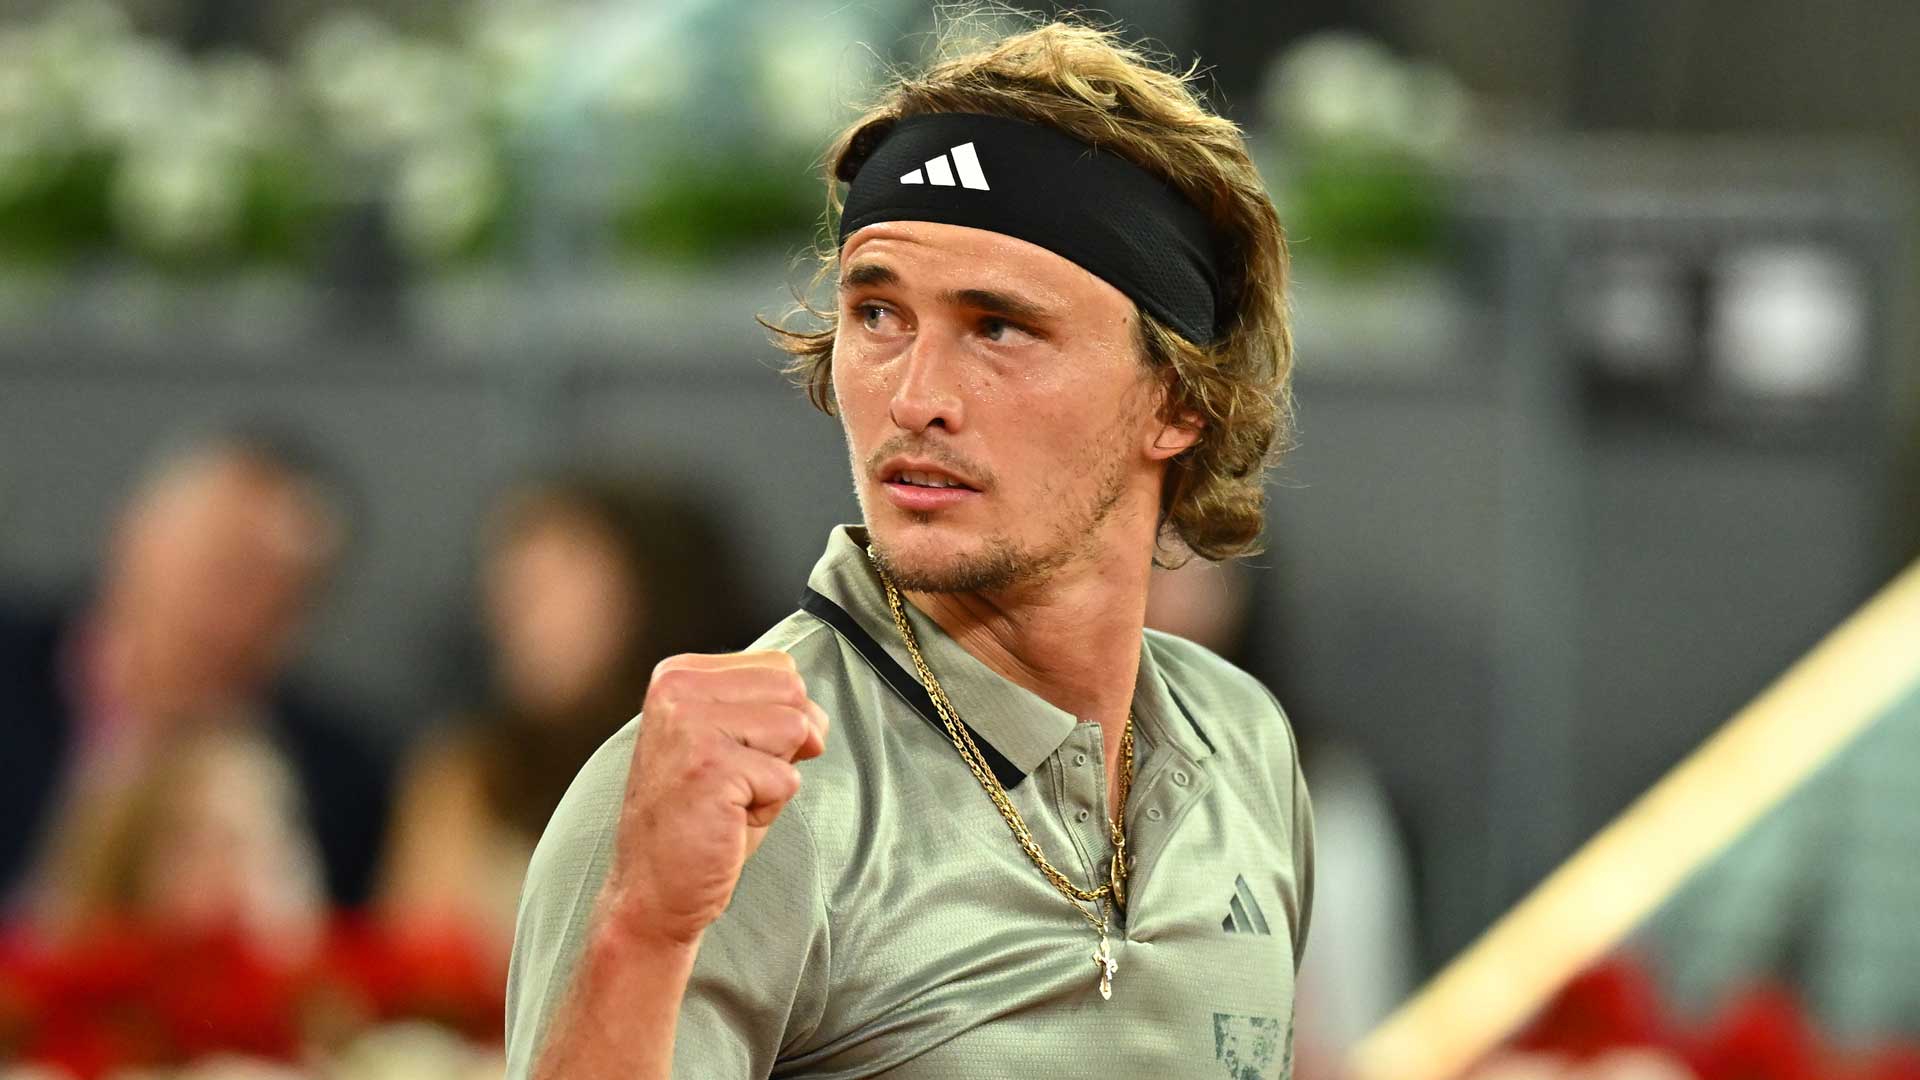 Alexander Zverev wins eight straight games to close out an opening victory in Madrid.